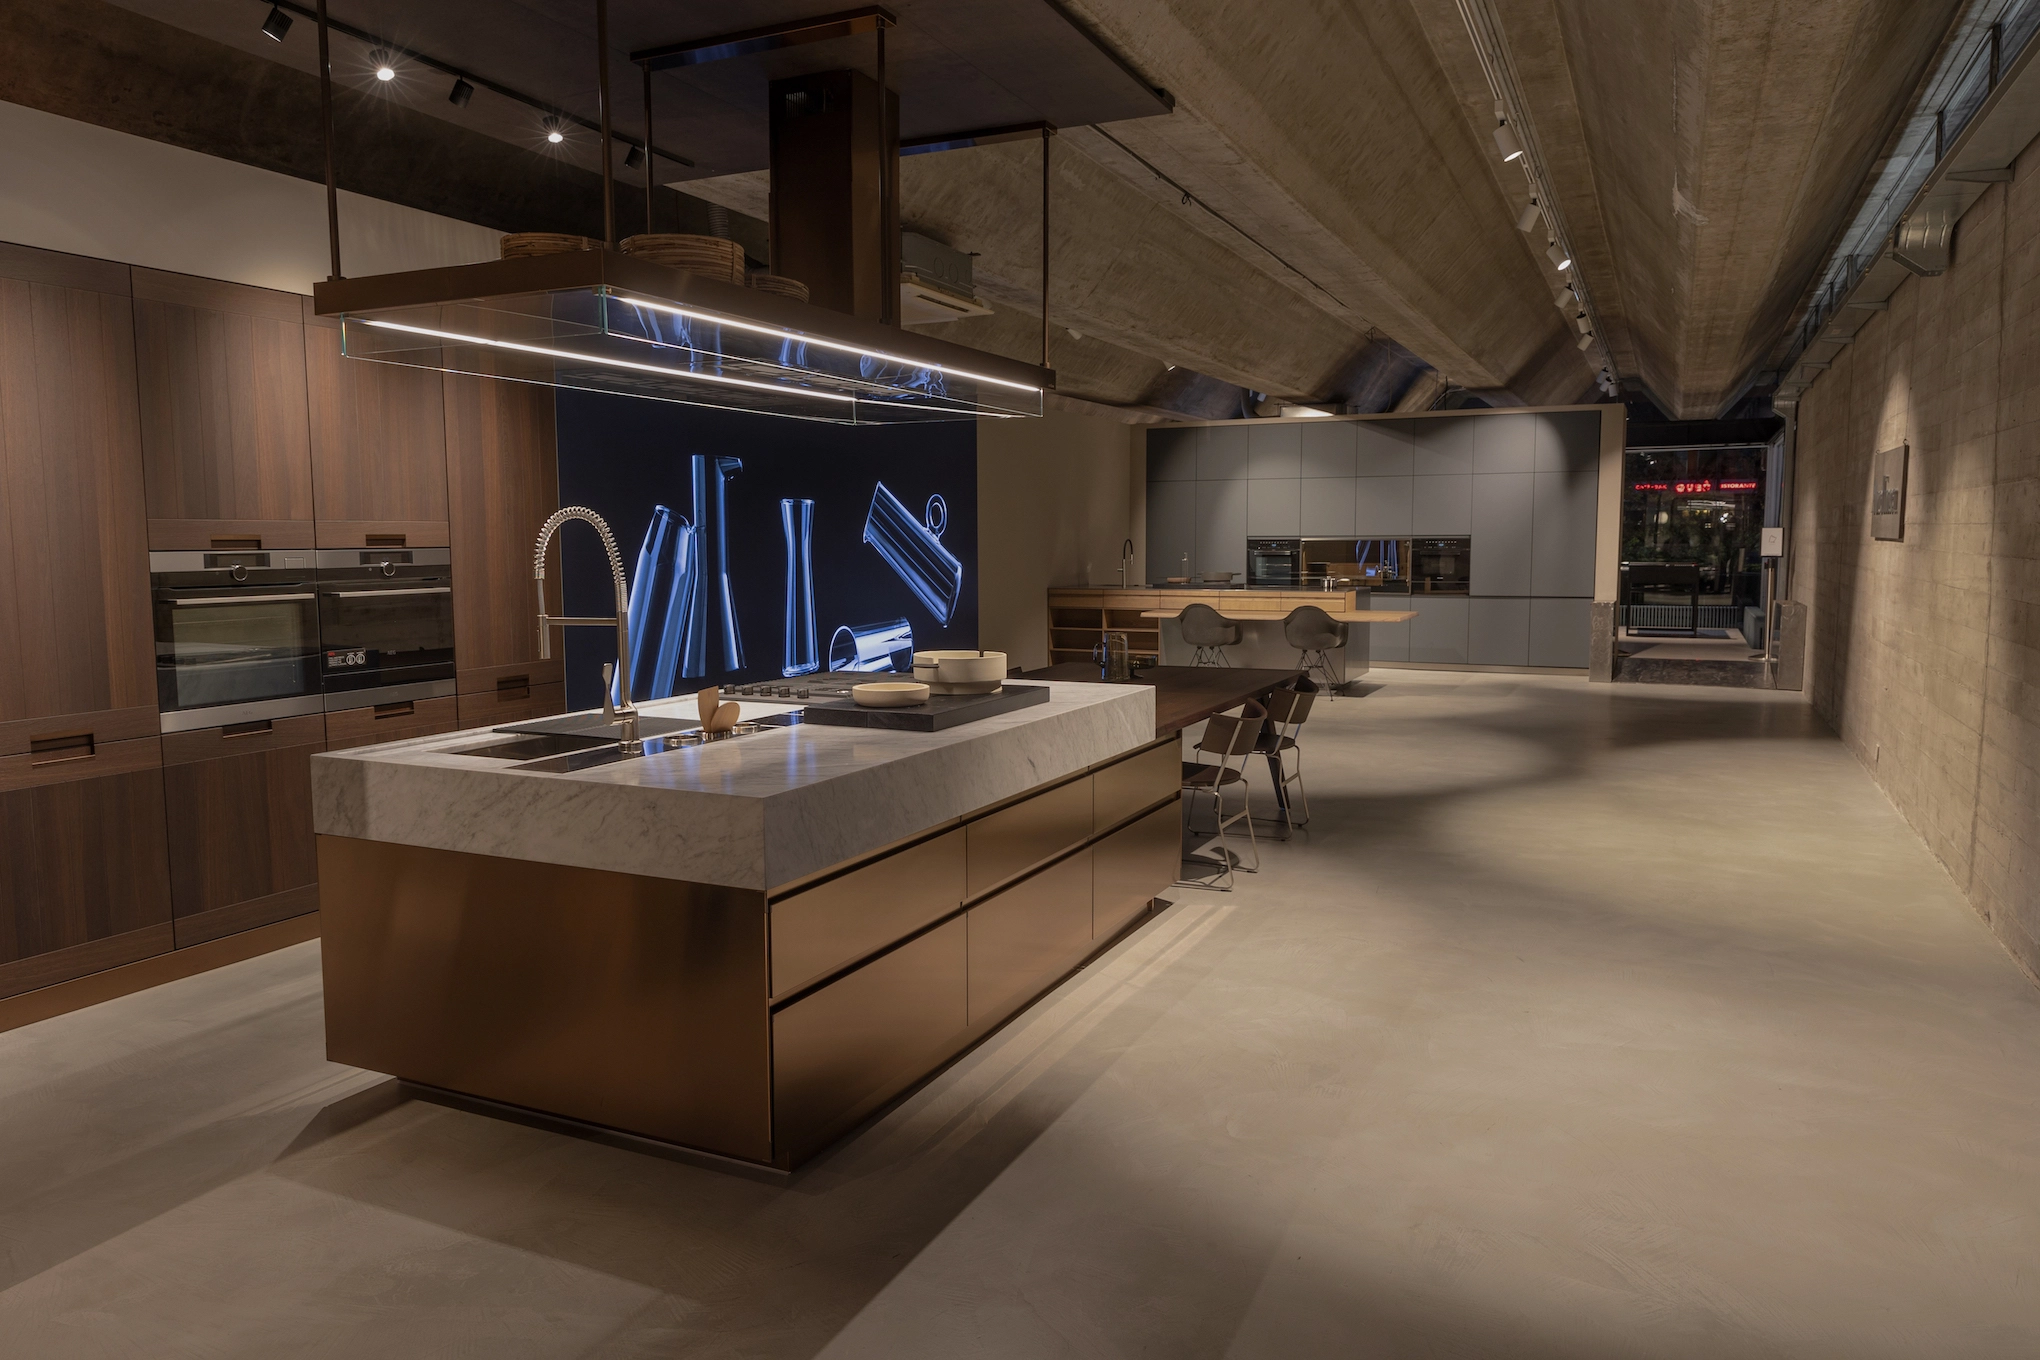 Photograph of the interior of the Arclinea showroom in Fontana Costabissara. Two kitchens are visible, one with a copper-colored steel island and one with light gray columns.